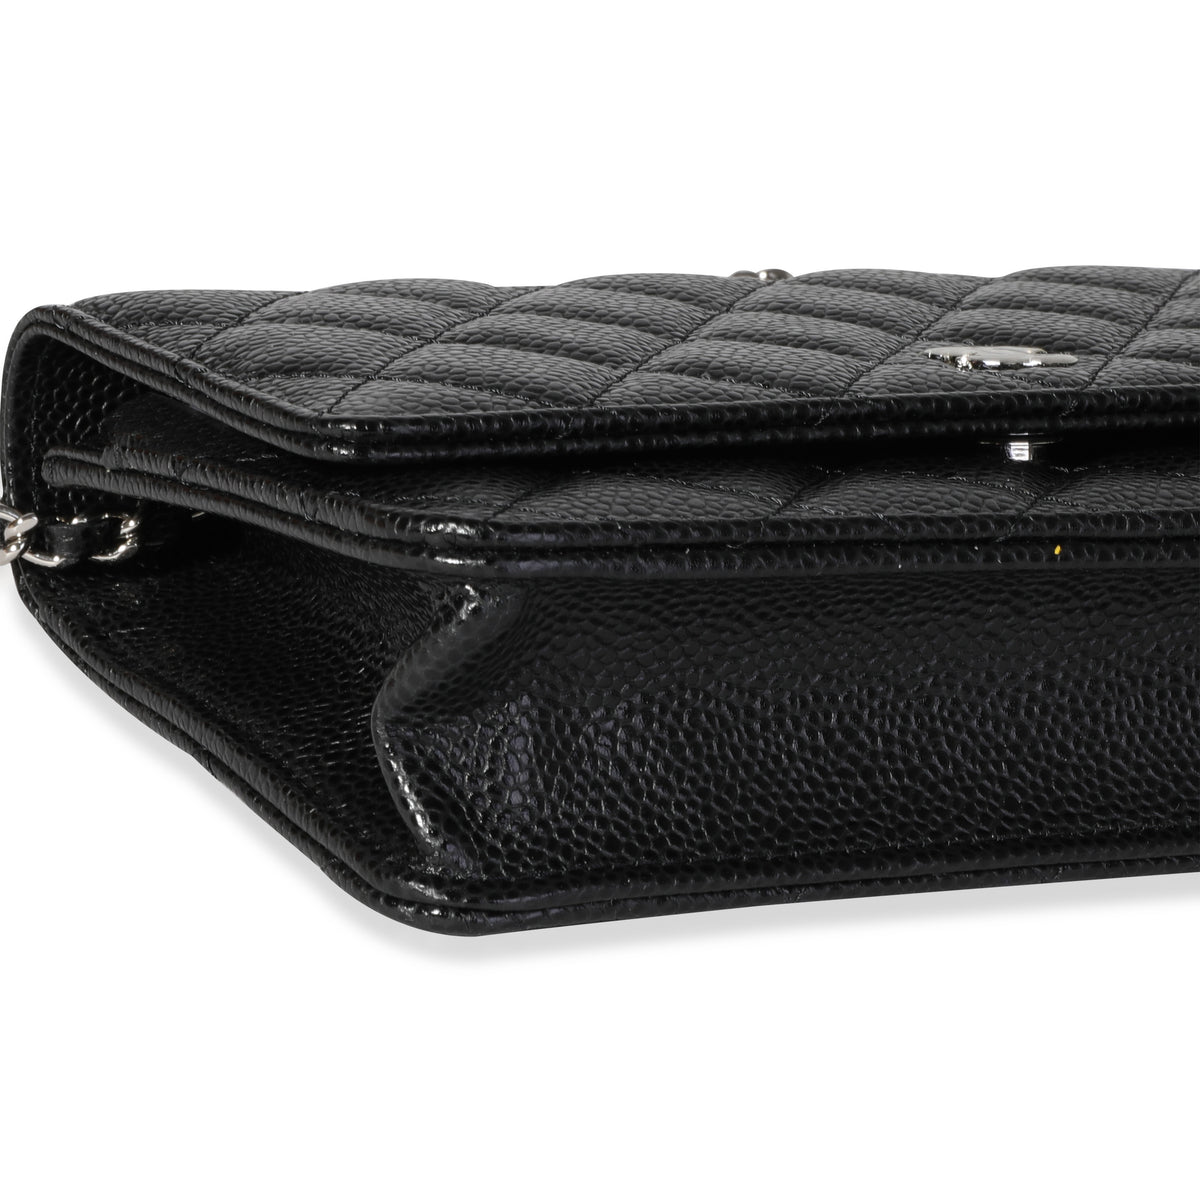 Chanel Black Quilted Caviar WOC